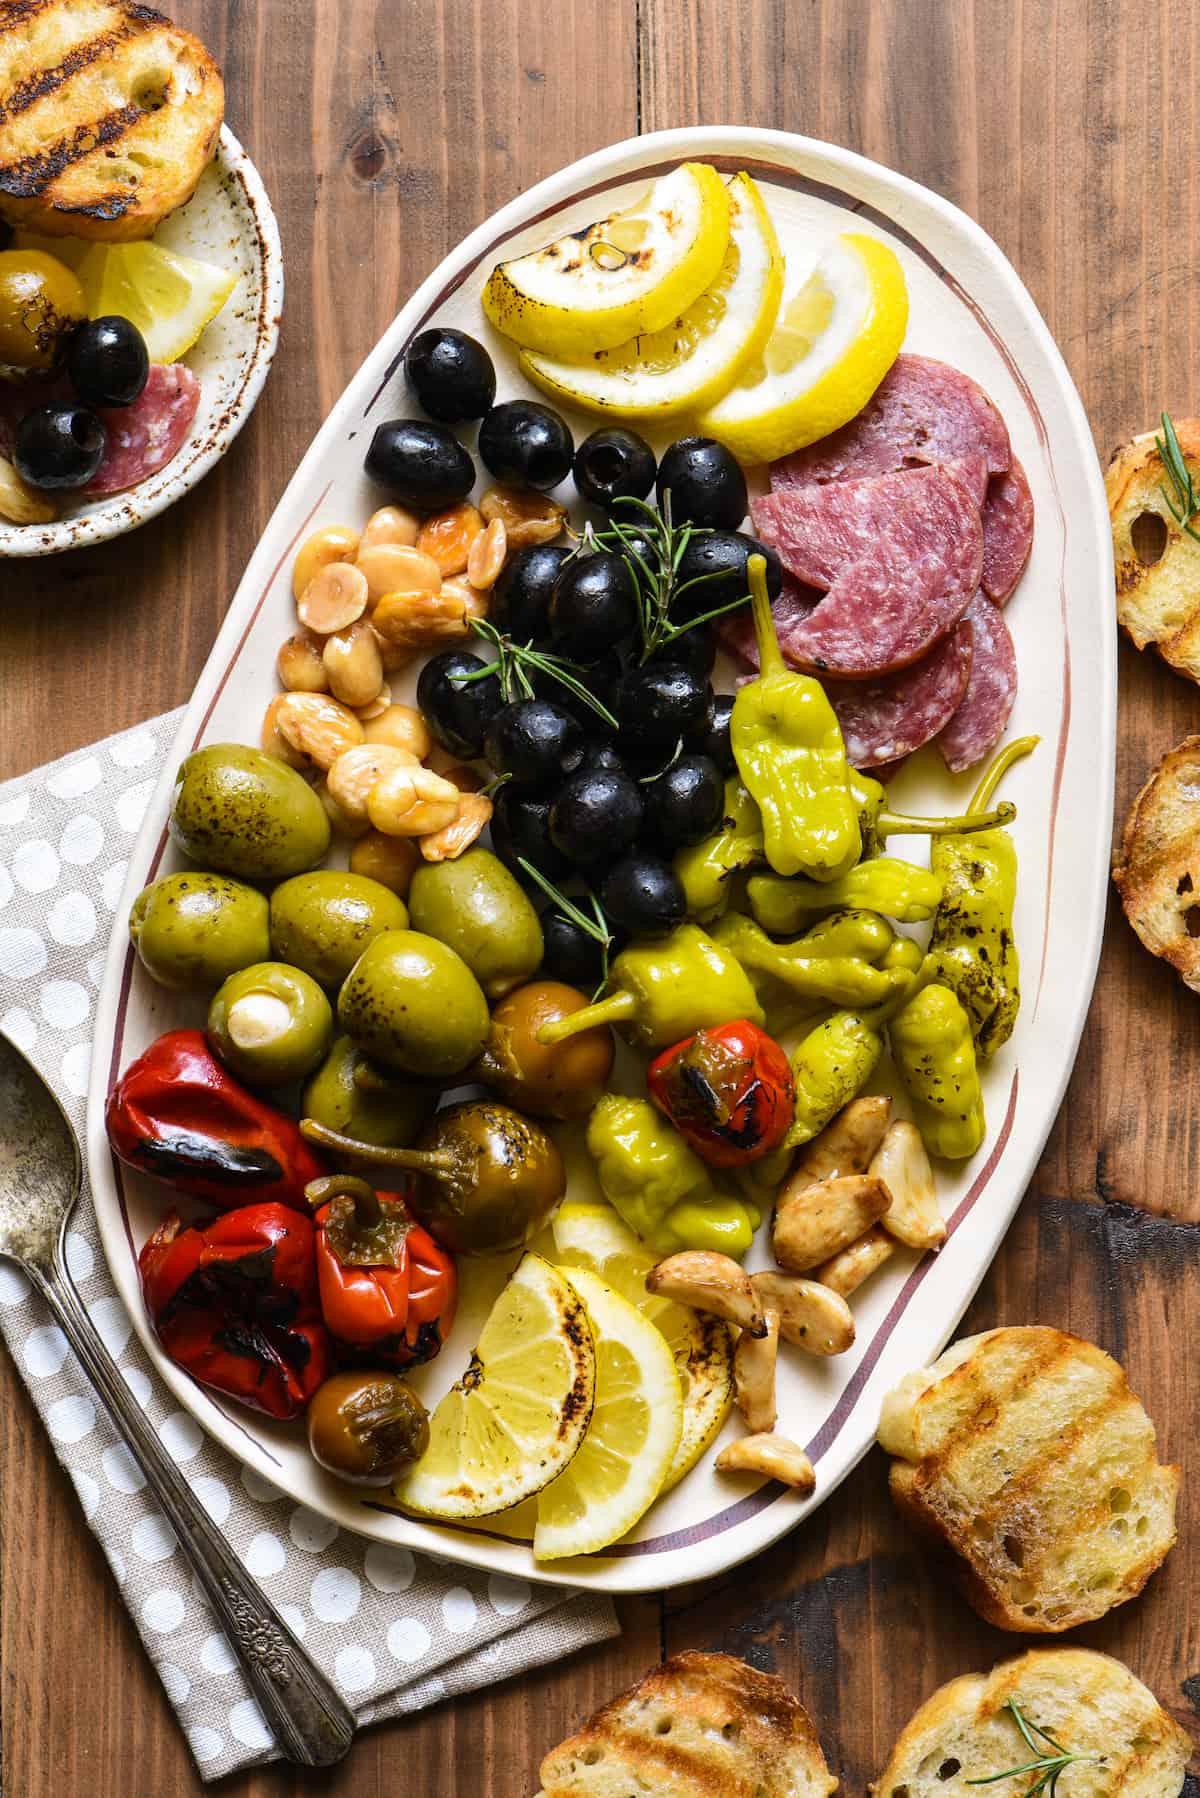 Fill a foil packet with olives, peppers, nuts and salami and throw it on the grill! This Grill-Roasted Antipasto will be the easiest summer appetizer you'll ever make! | foxeslovelemons.com